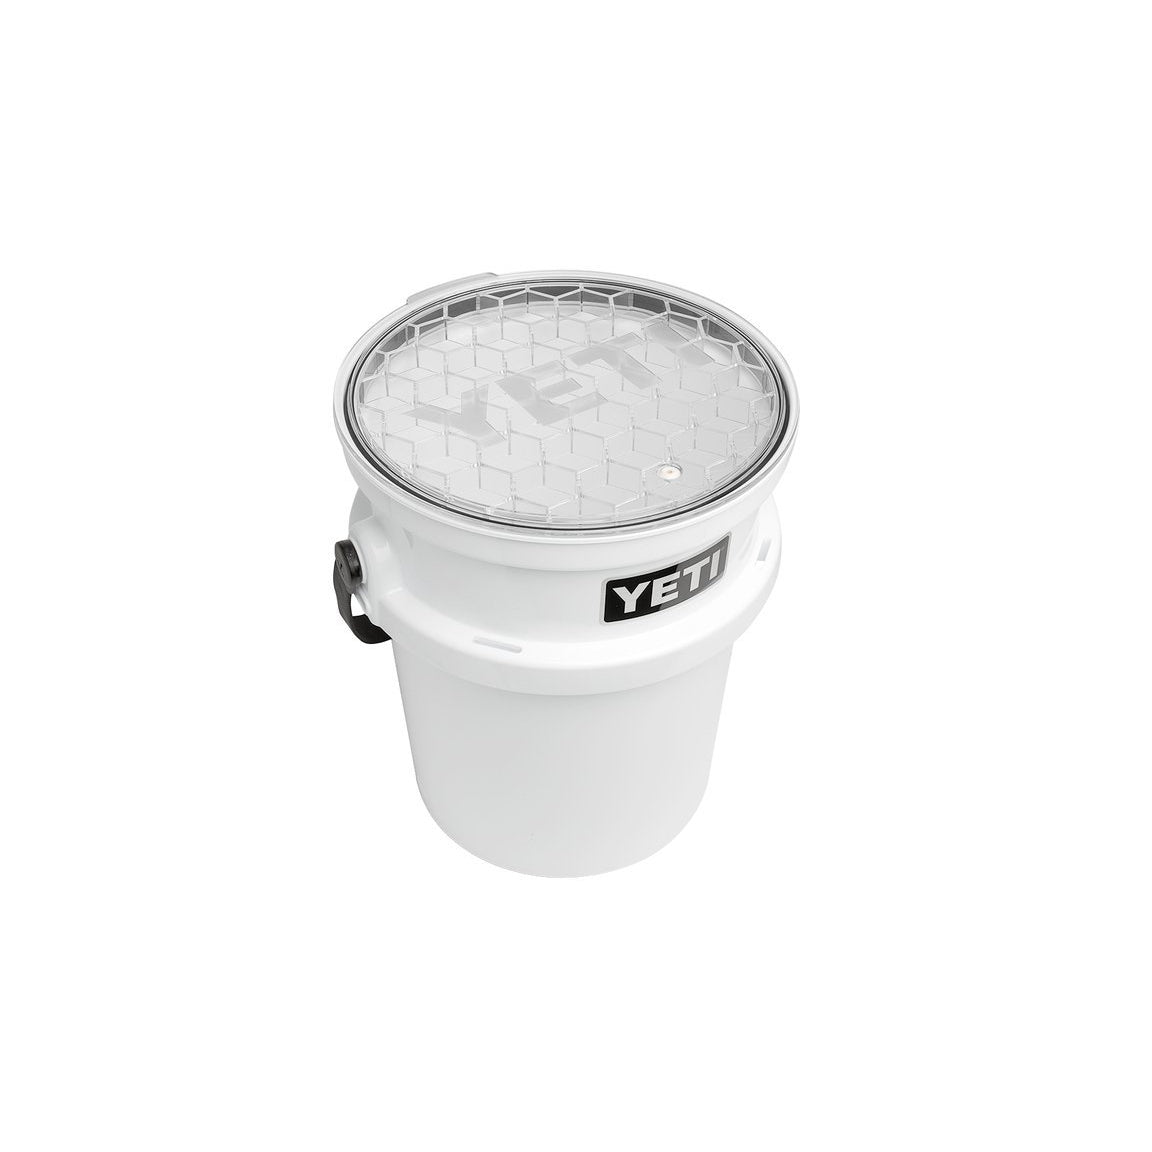 YETI Loadout Bucket Lid-HUNTING/OUTDOORS-Yeti Coolers-Kevin's Fine Outdoor Gear & Apparel